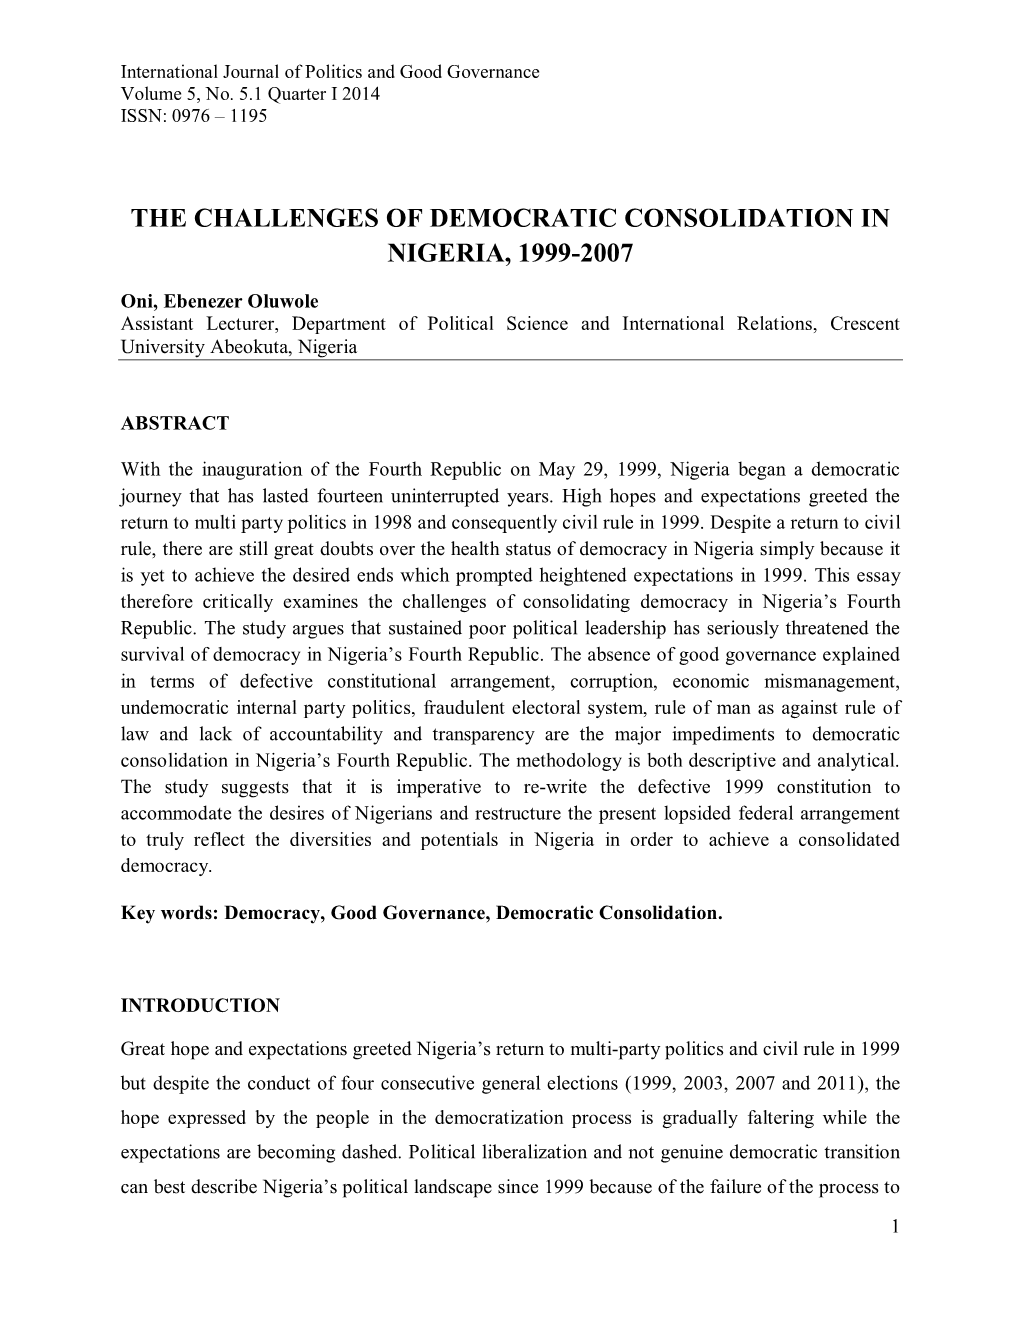 The Challenges of Democratic Consolidation in Nigeria, 1999-2007